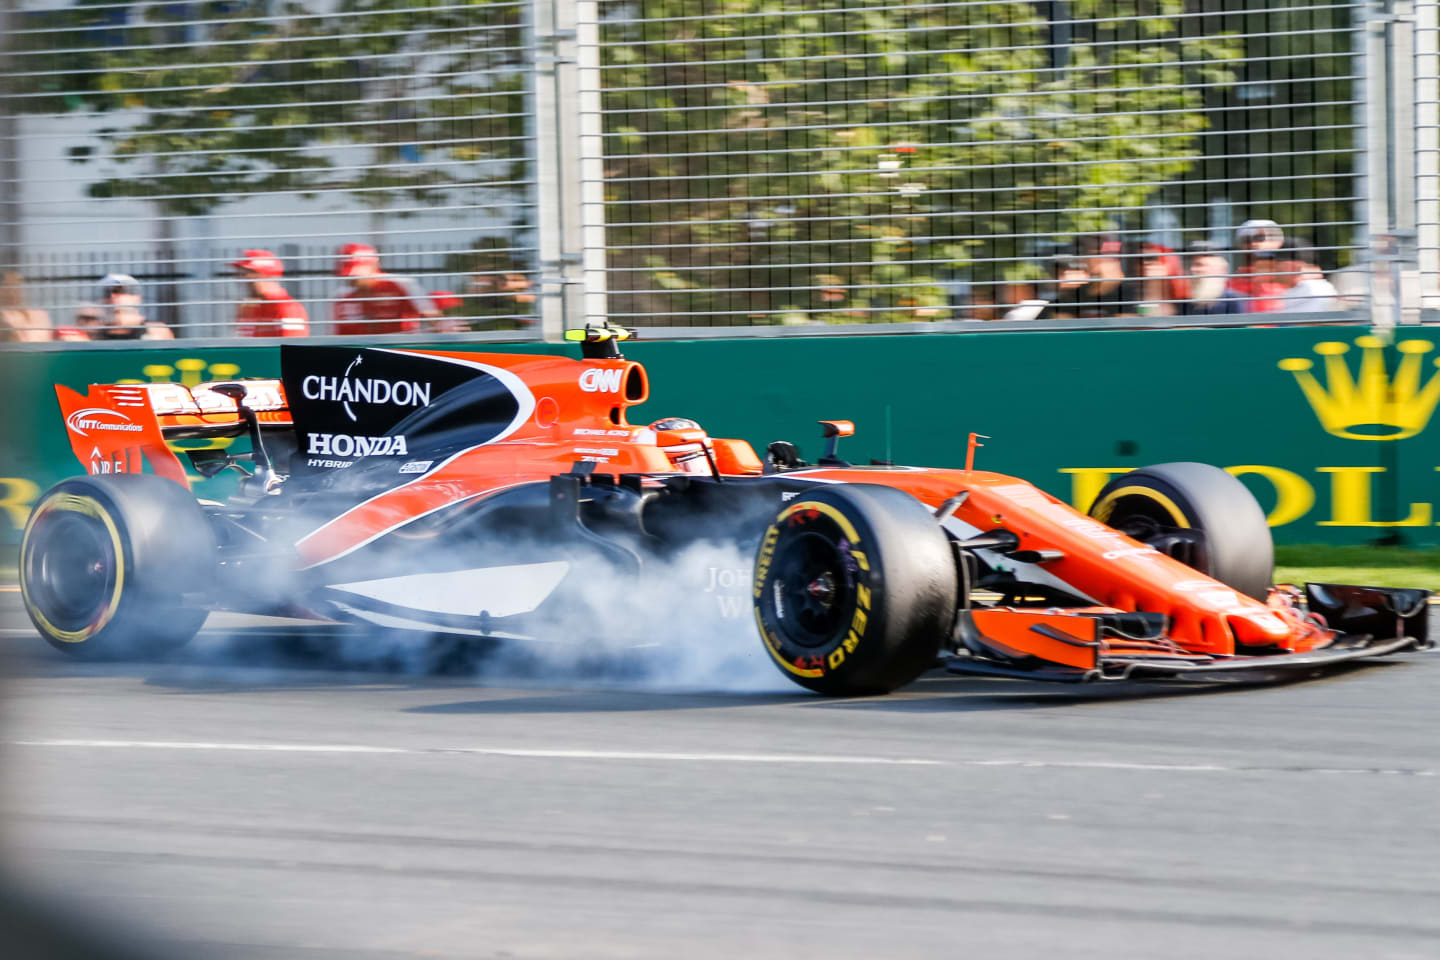 After three challenging seasons, with little to celebrate, McLaren and Honda parted ways